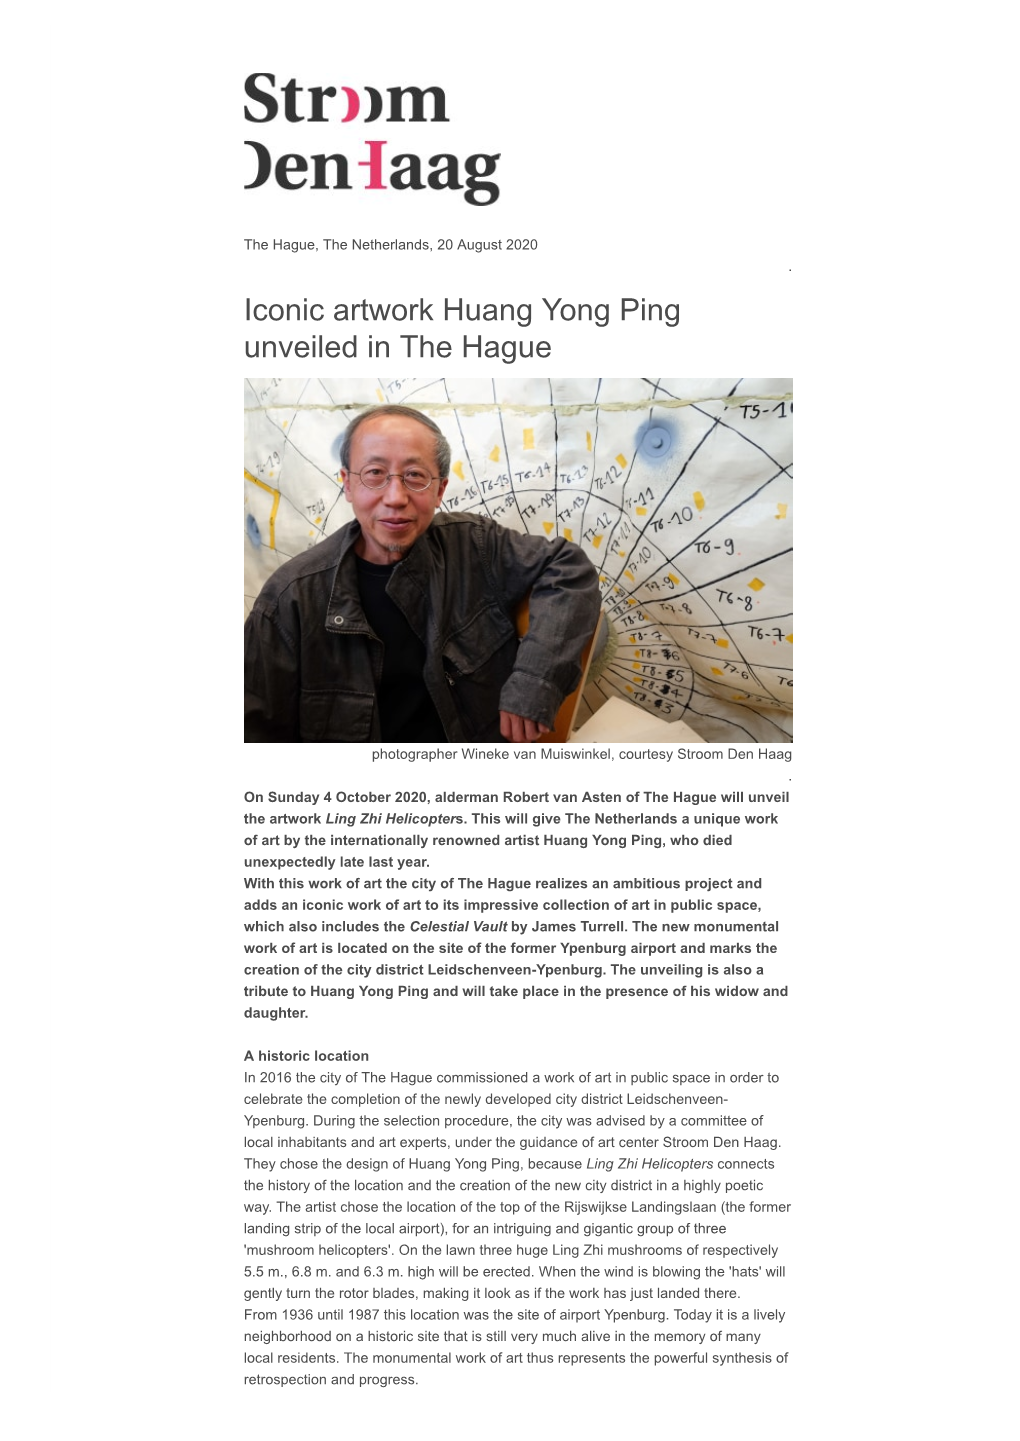 Iconic Artwork Huang Yong Ping Unveiled in the Hague